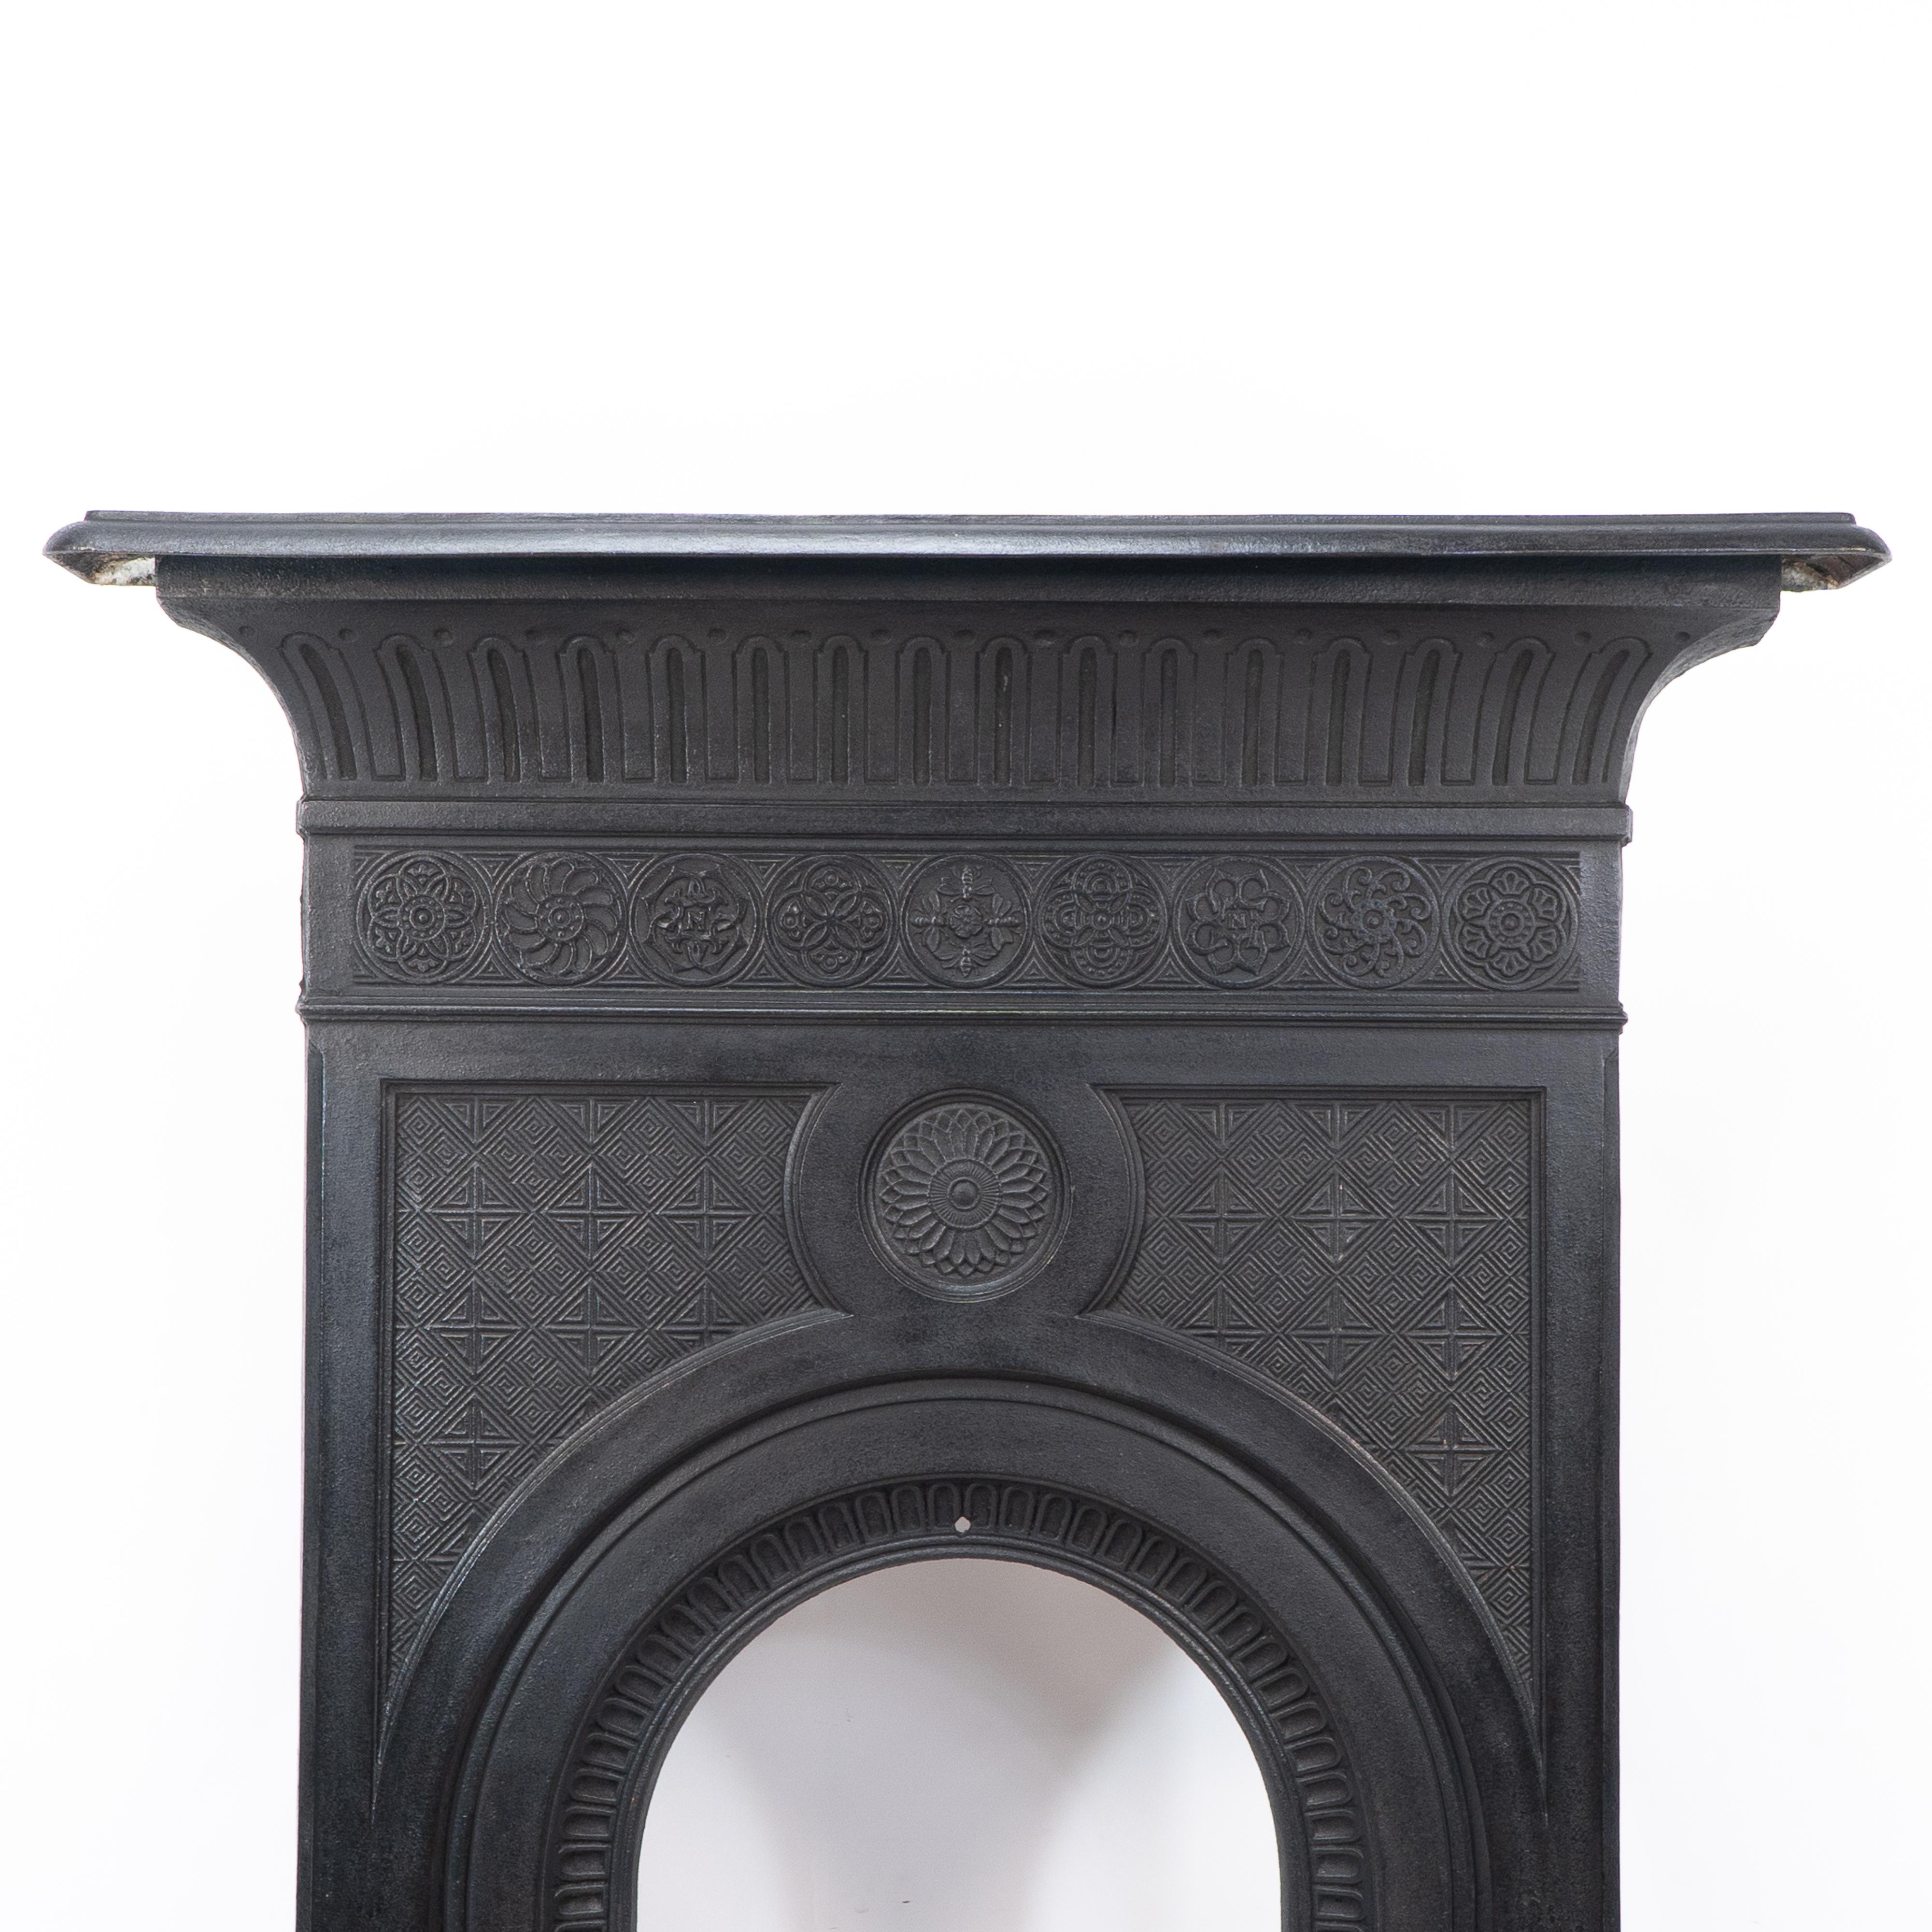 Thomas Jeckyll for Barnard Bishop and Barnard. A rare Aesthetic Movement fireplace with curvaceous mantle with gadrooned and dot details and a row of Japanese floral Insignias the centre one decorated with Barnard, Bishop and Barnards trademark four